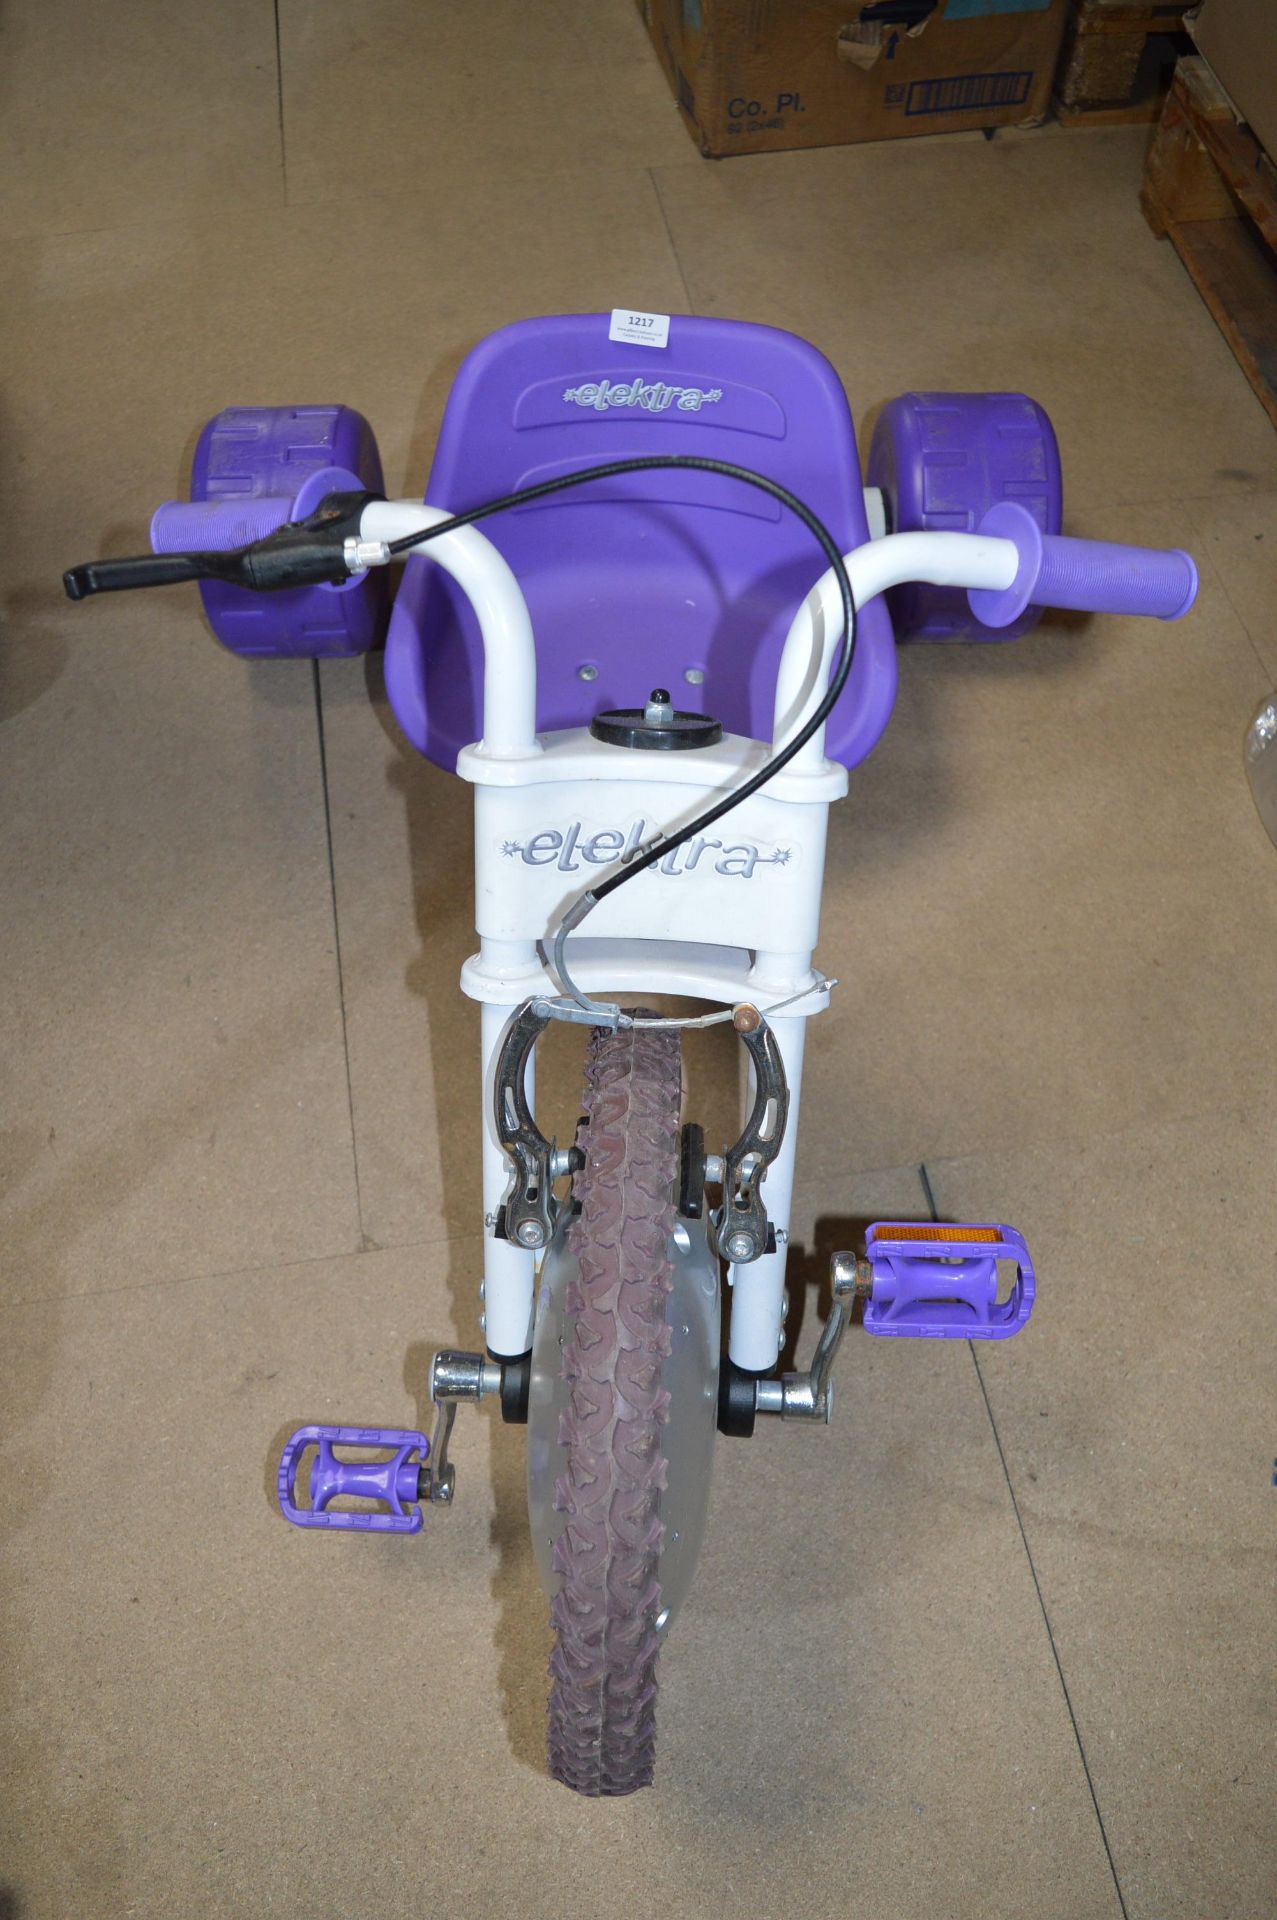 Elektra Child’s Tricycle